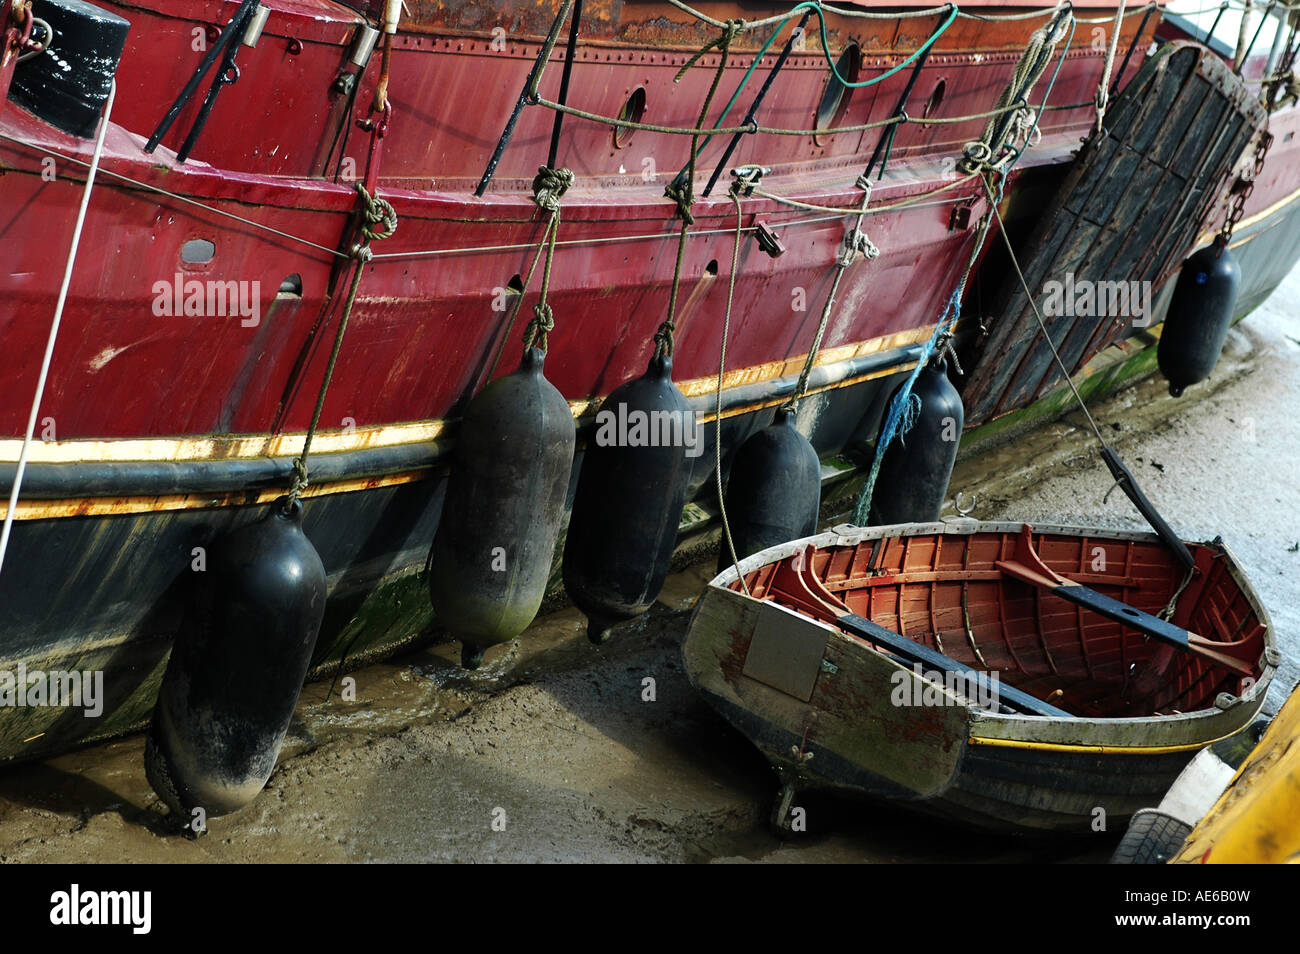 Large and small boat Stock Photo